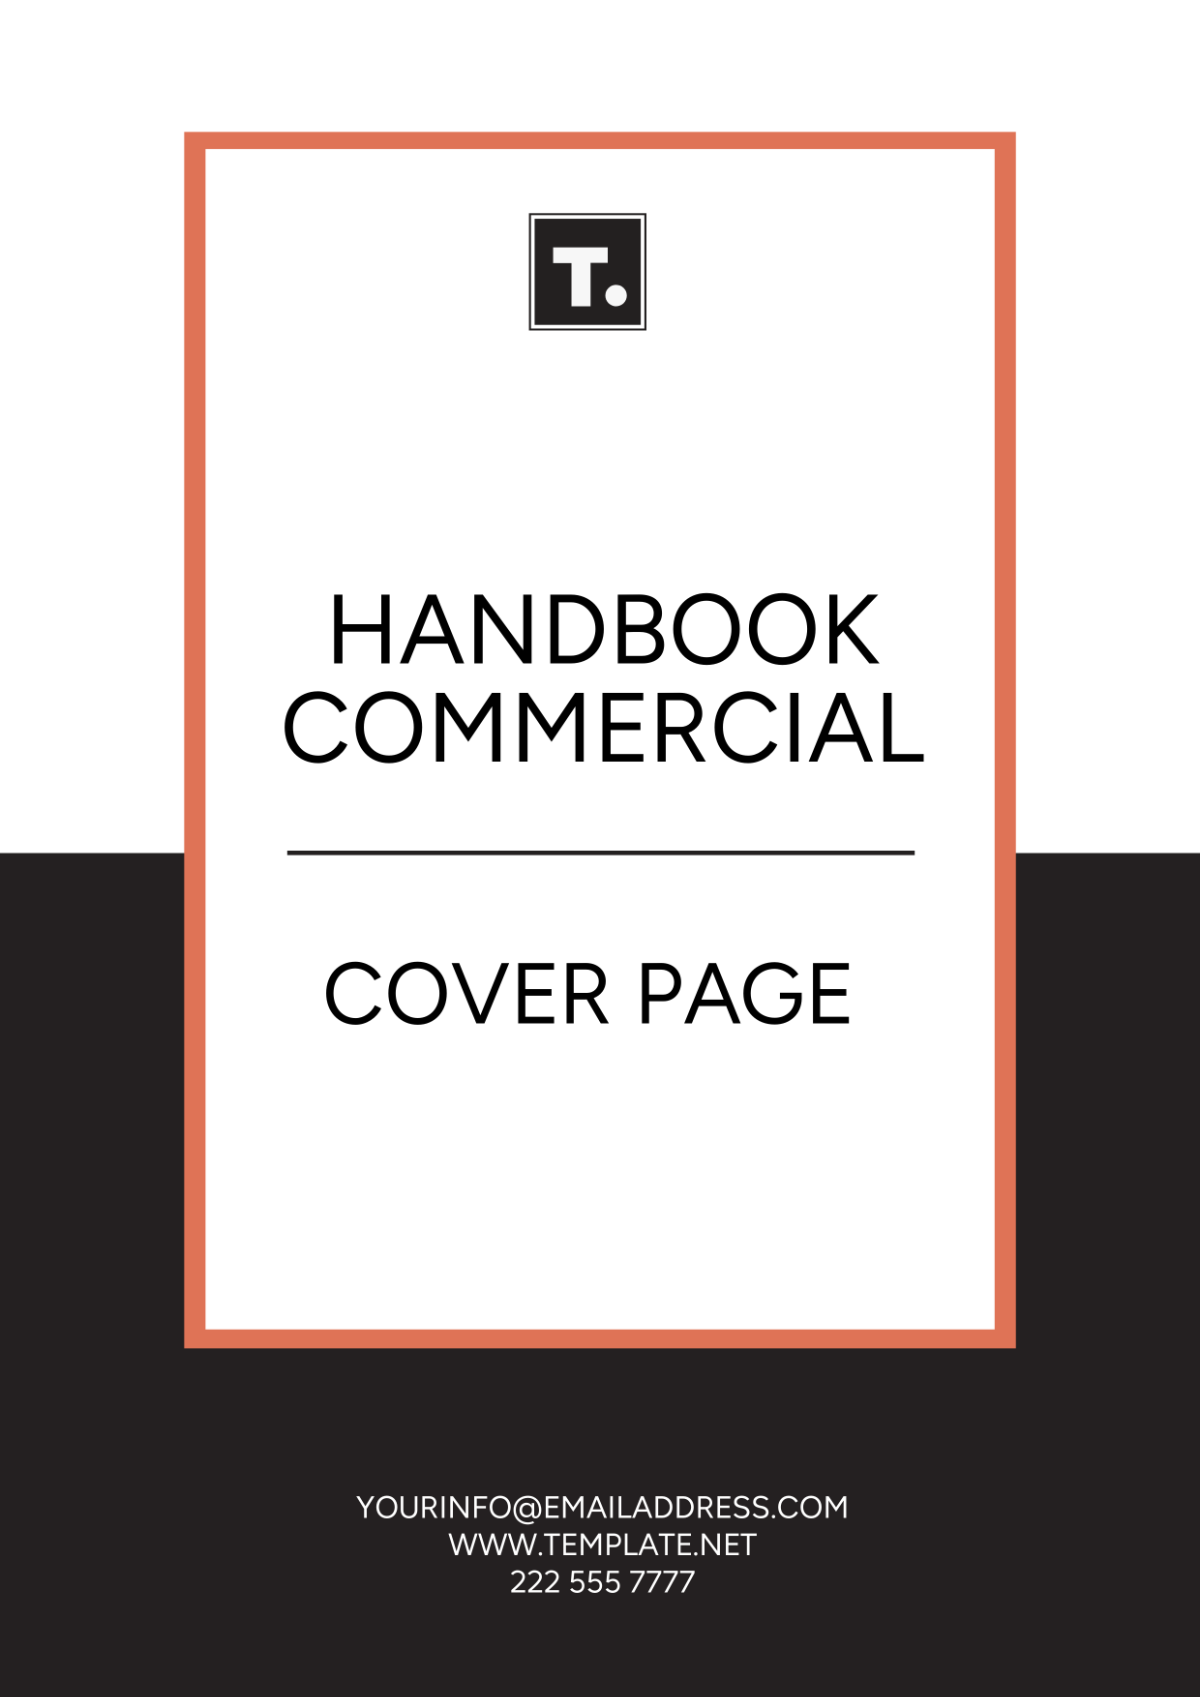 Handbook Commercial Cover Page Template